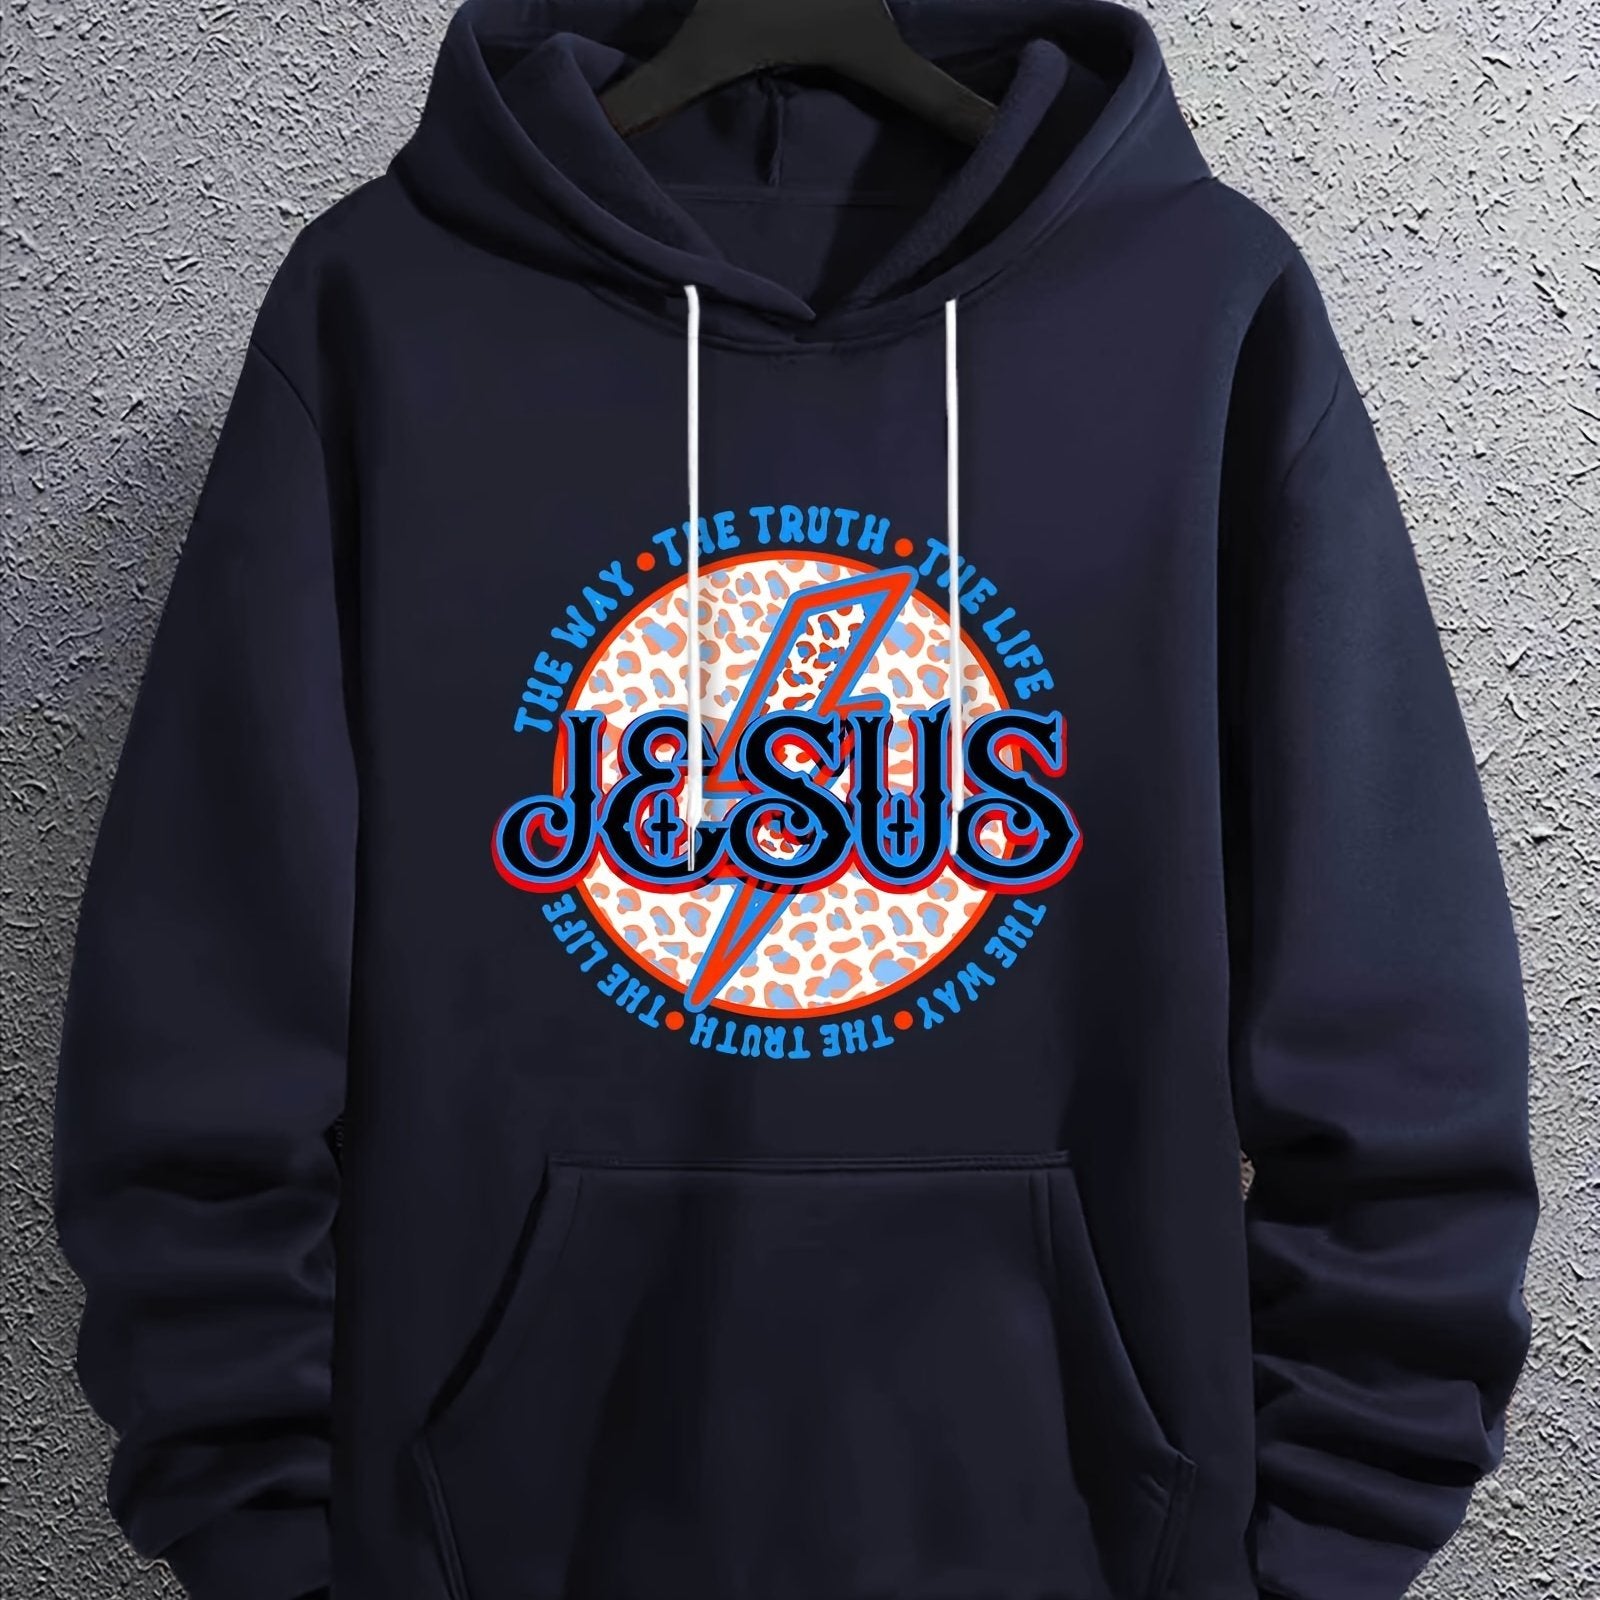 JESUS: The Way The Truth The Life Men's Christian Pullover Hooded Sweatshirt claimedbygoddesigns